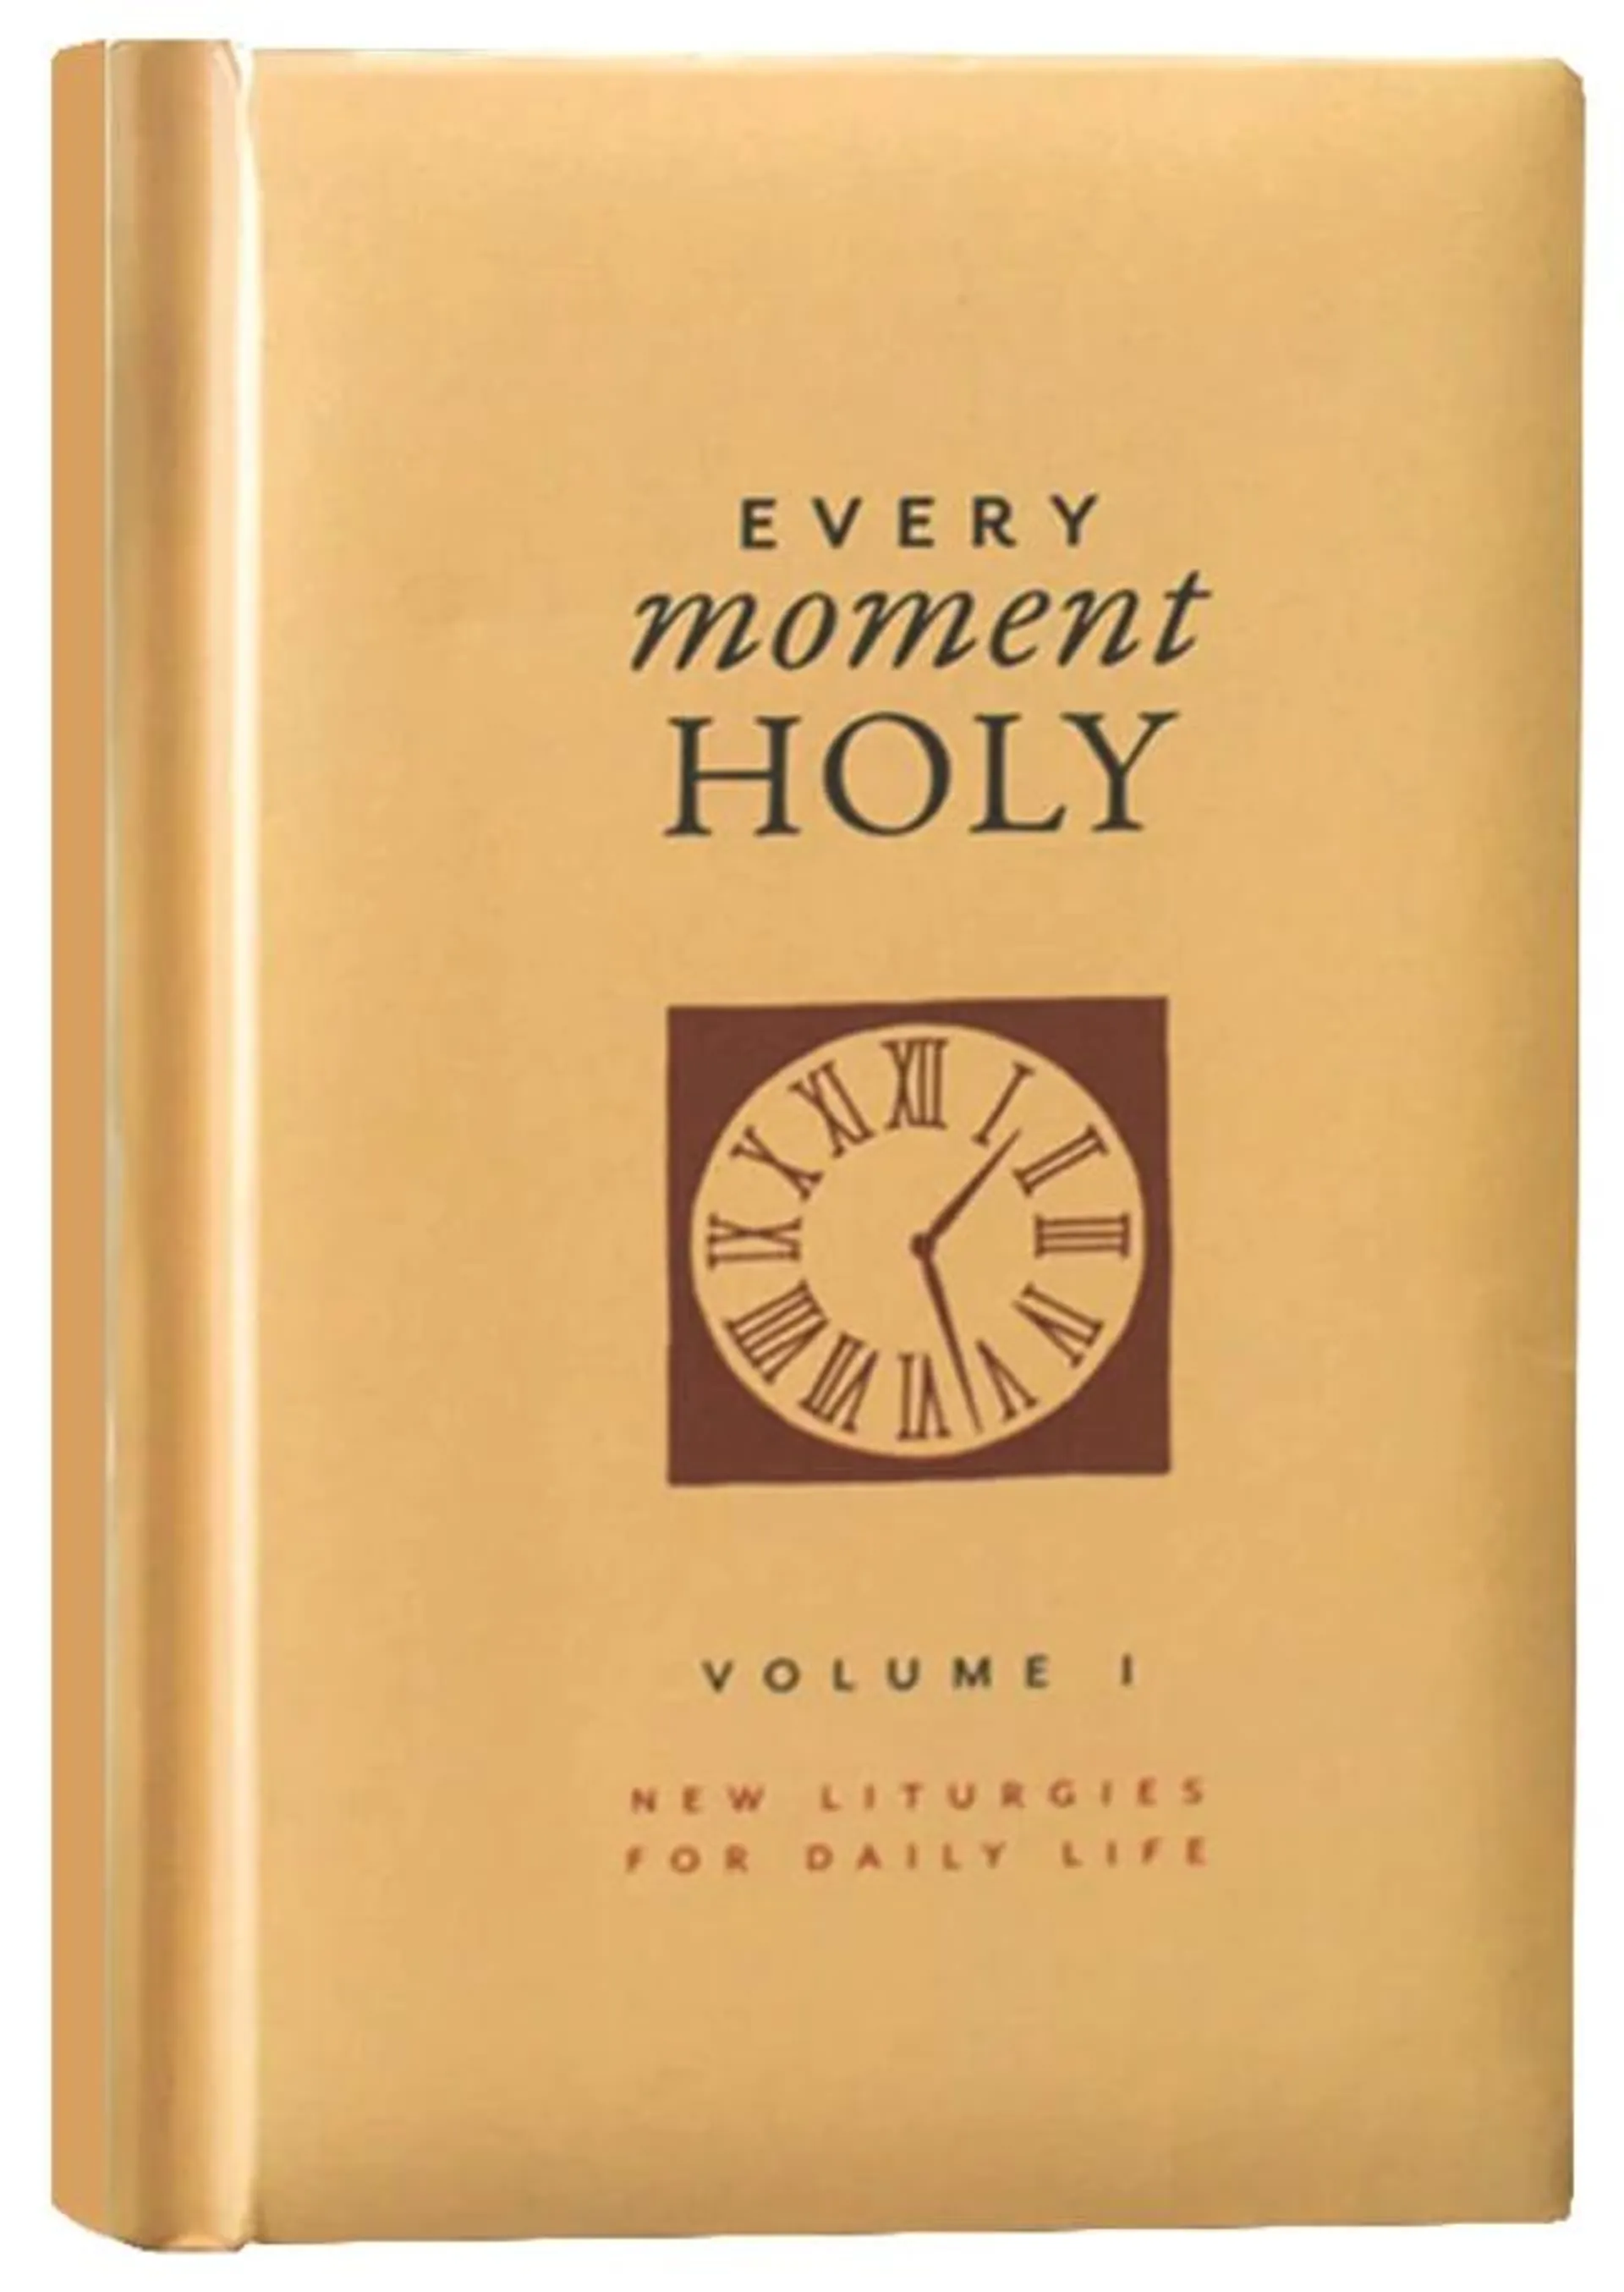 New Liturgies For Daily Life (Gift Edition) (#01 in Every Moment Holy Series)